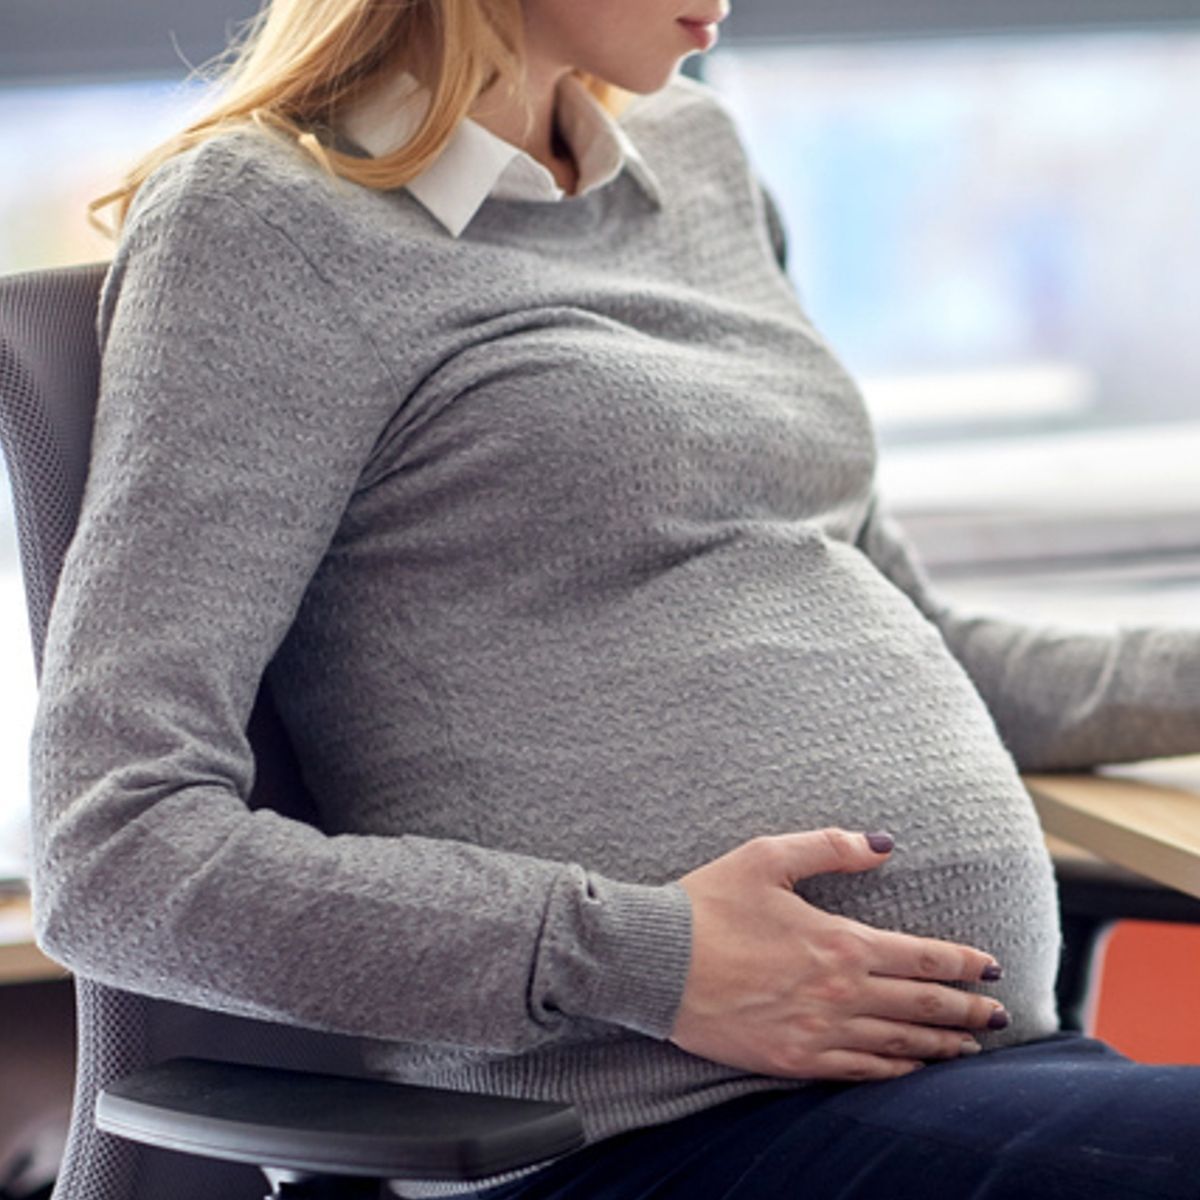 Is Working While Pregnant Safe?